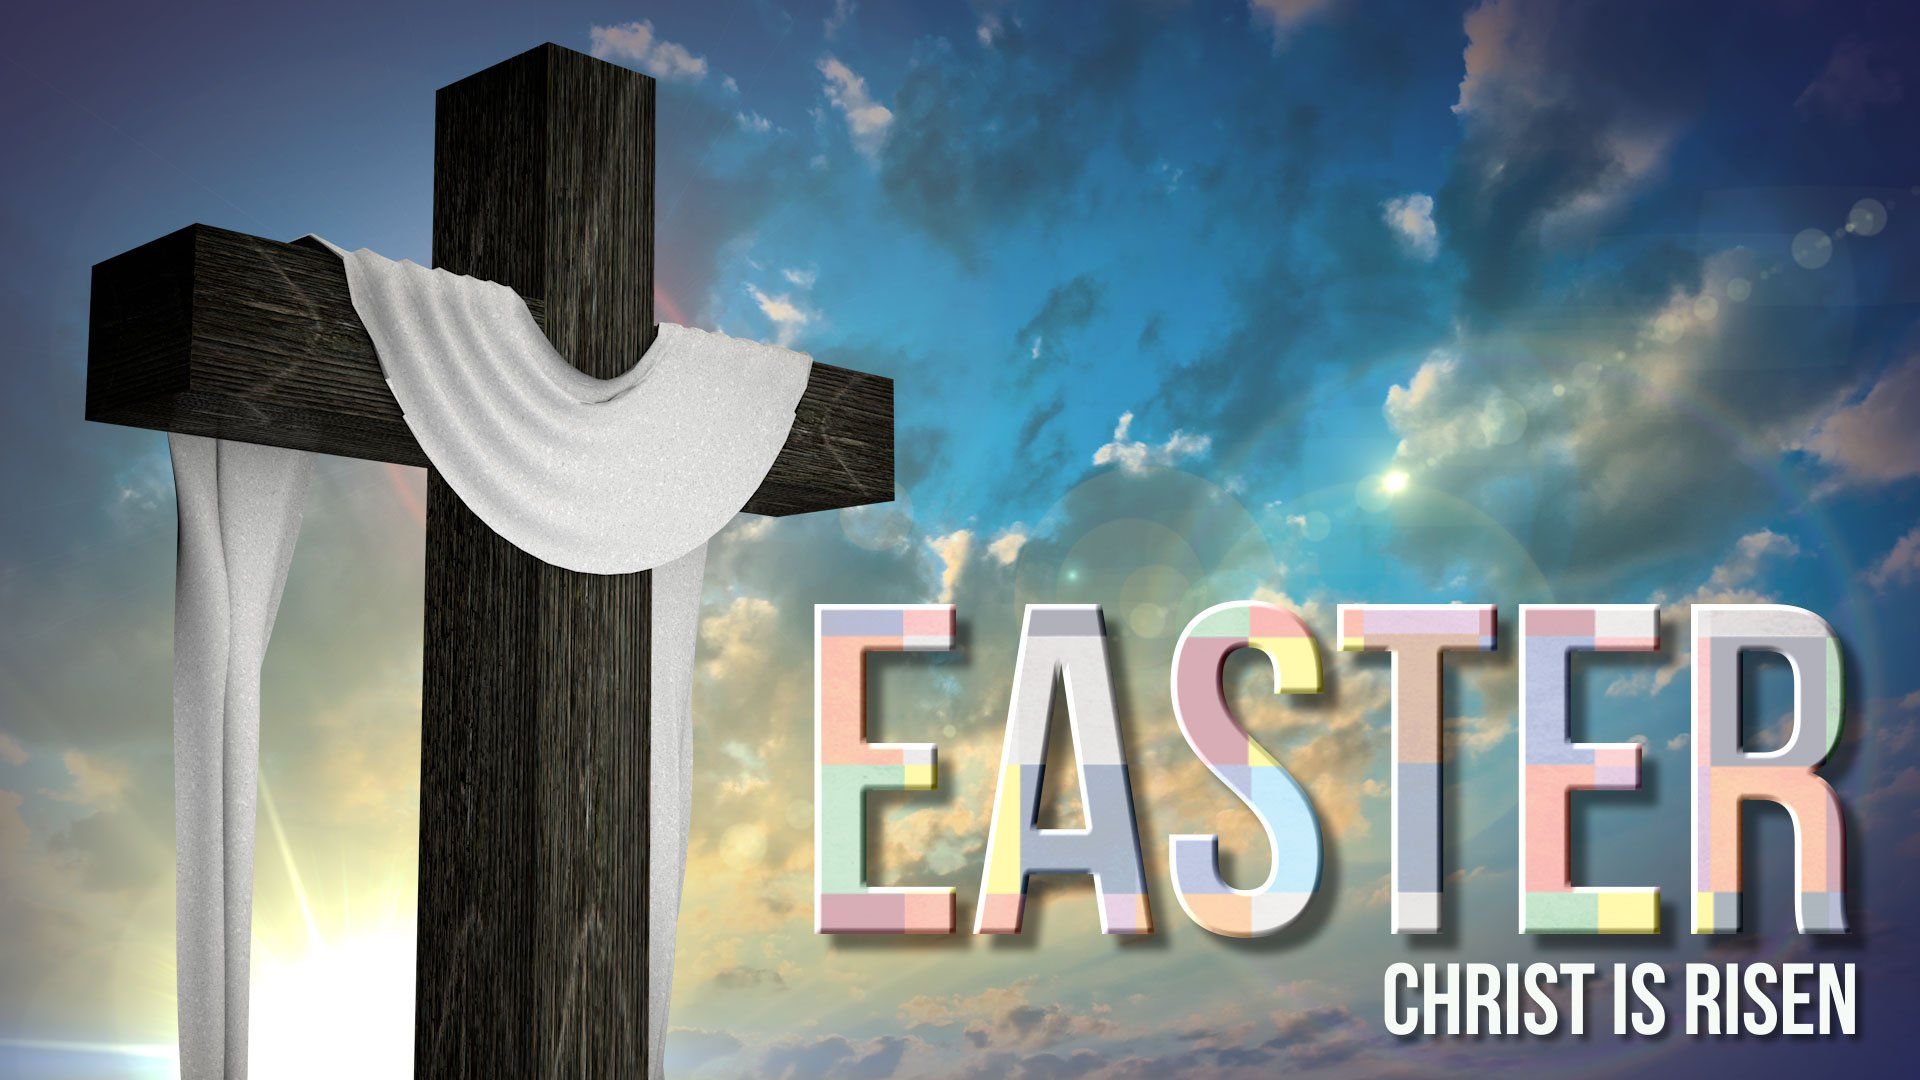 Free download Holy cross holy cross facebook covers holy cross image and wallpaper [1920x1080] for your Desktop, Mobile & Tablet. Explore Easter Cross Wallpaper. Wallpaper Jesus Cross Desktop Background